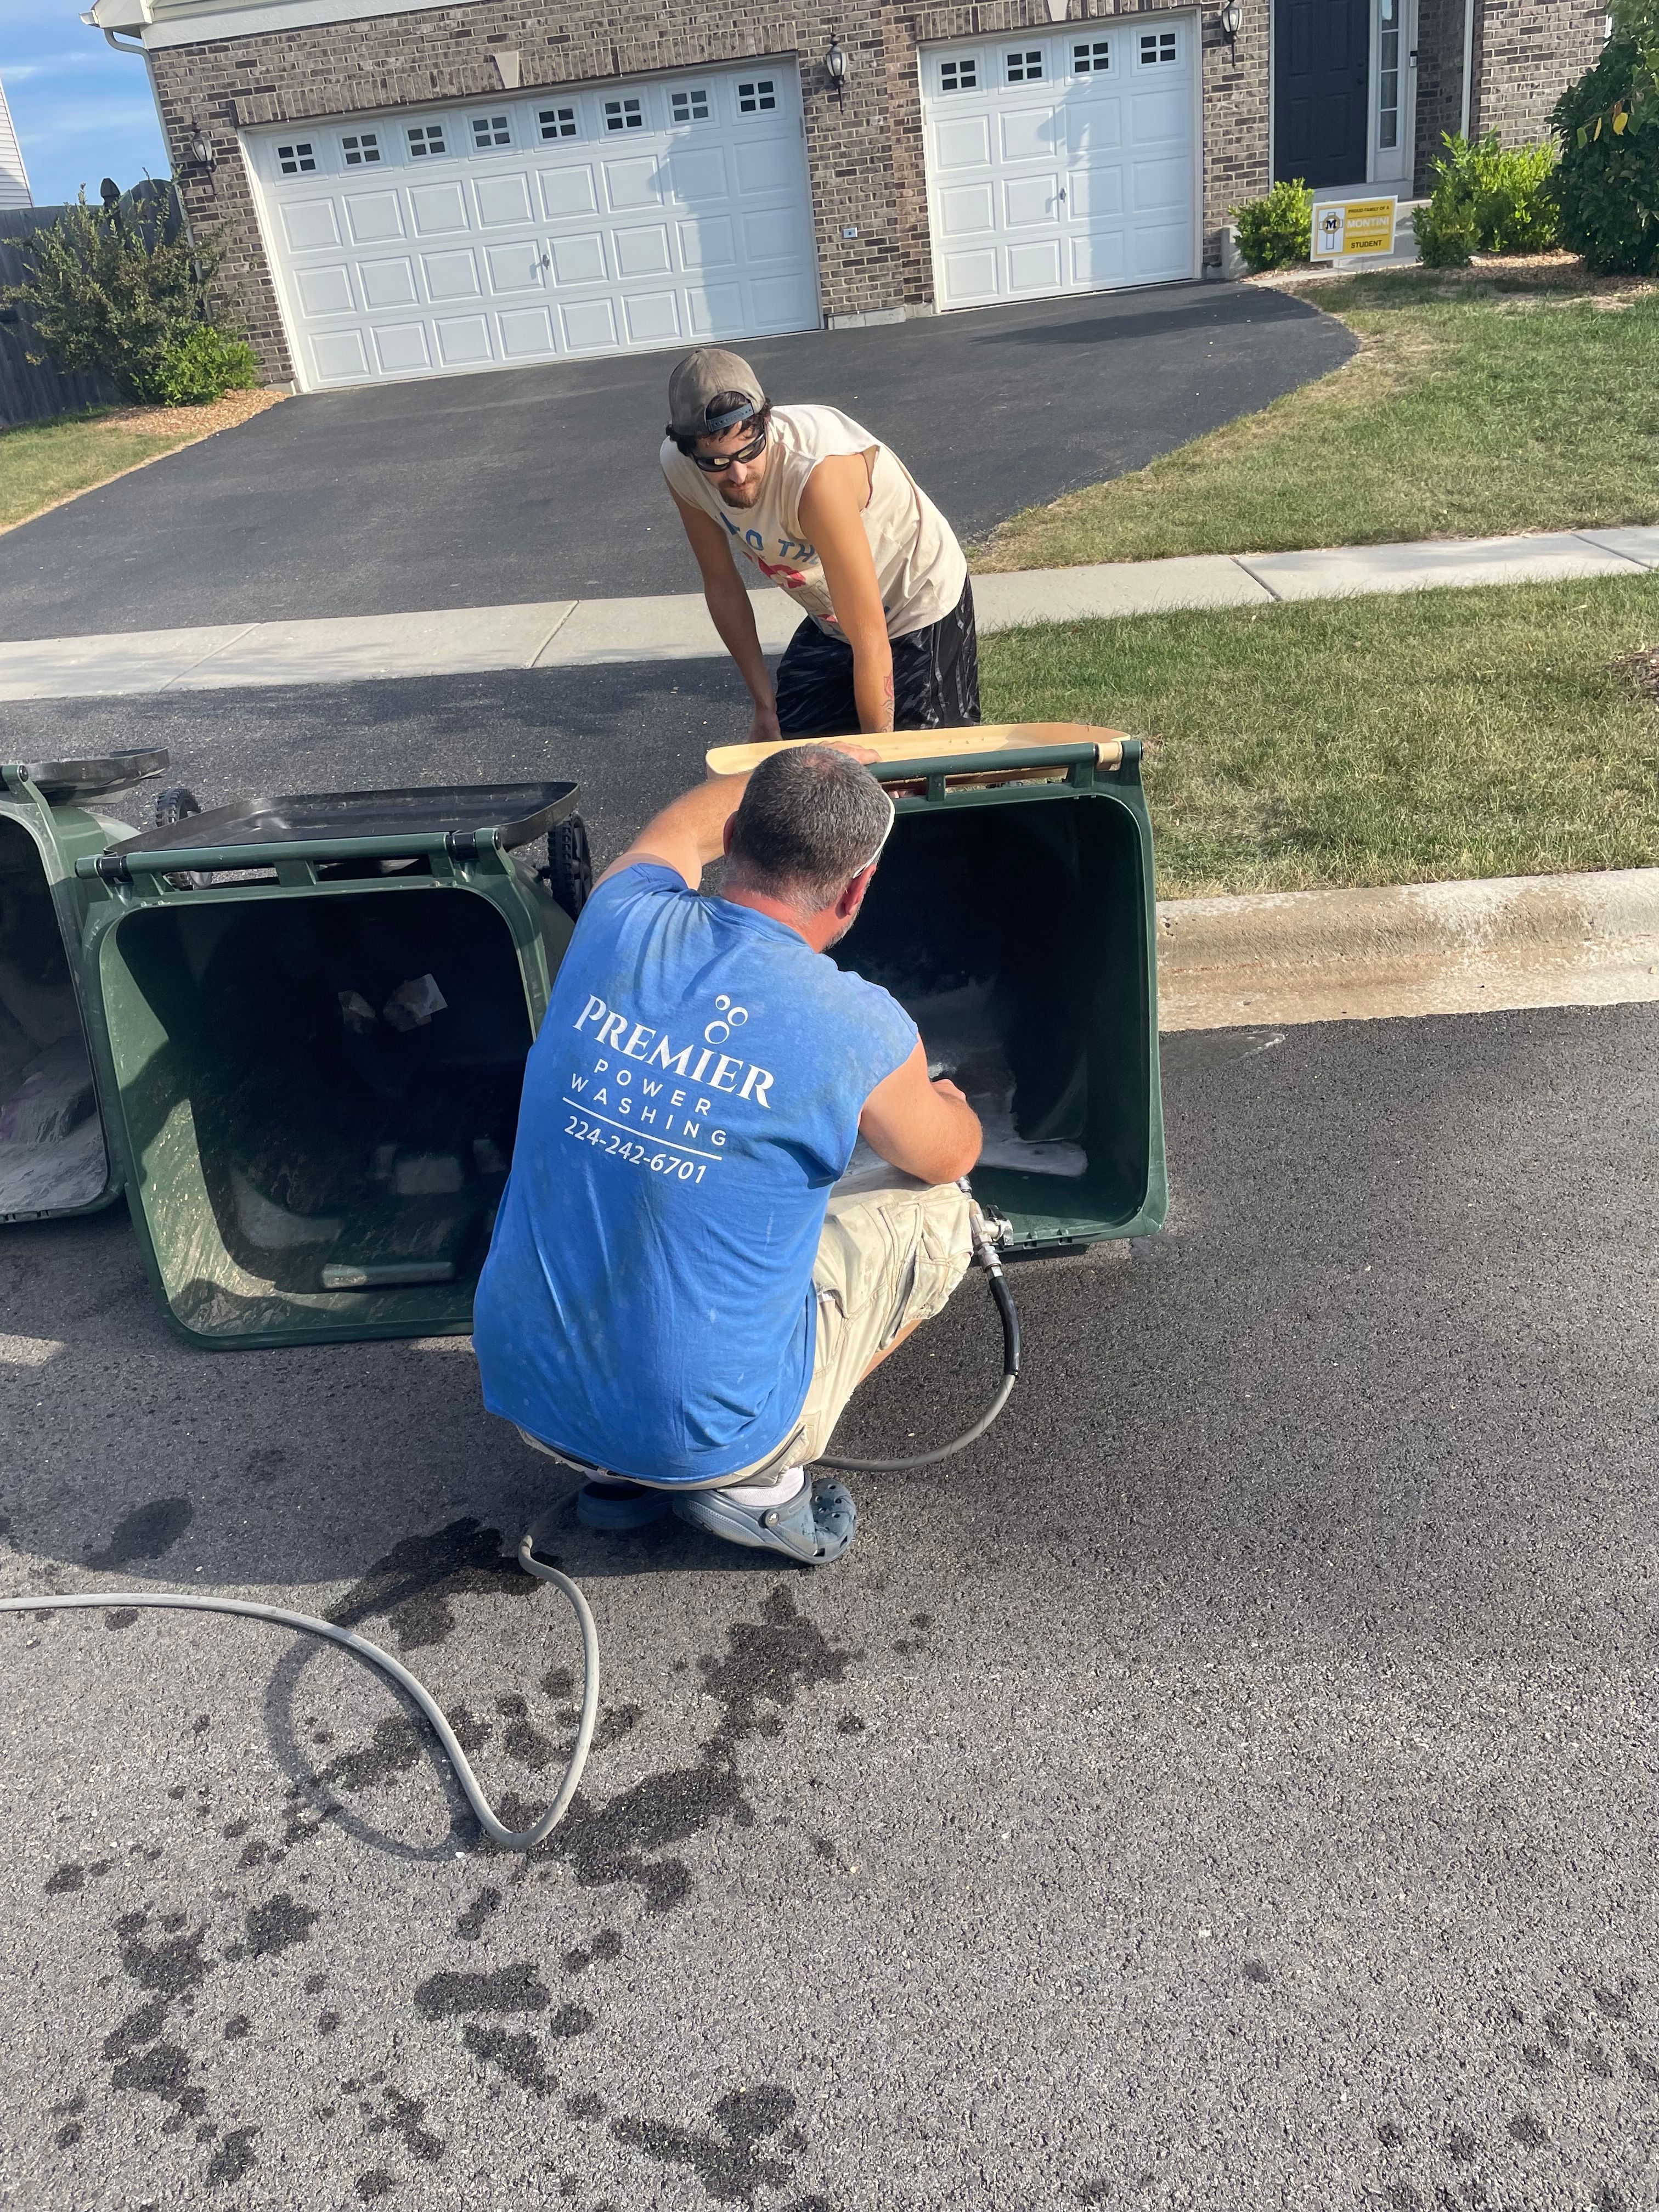 Trash & Recycling Bin Cleaning for Premier Partners, LLC. in Volo, IL